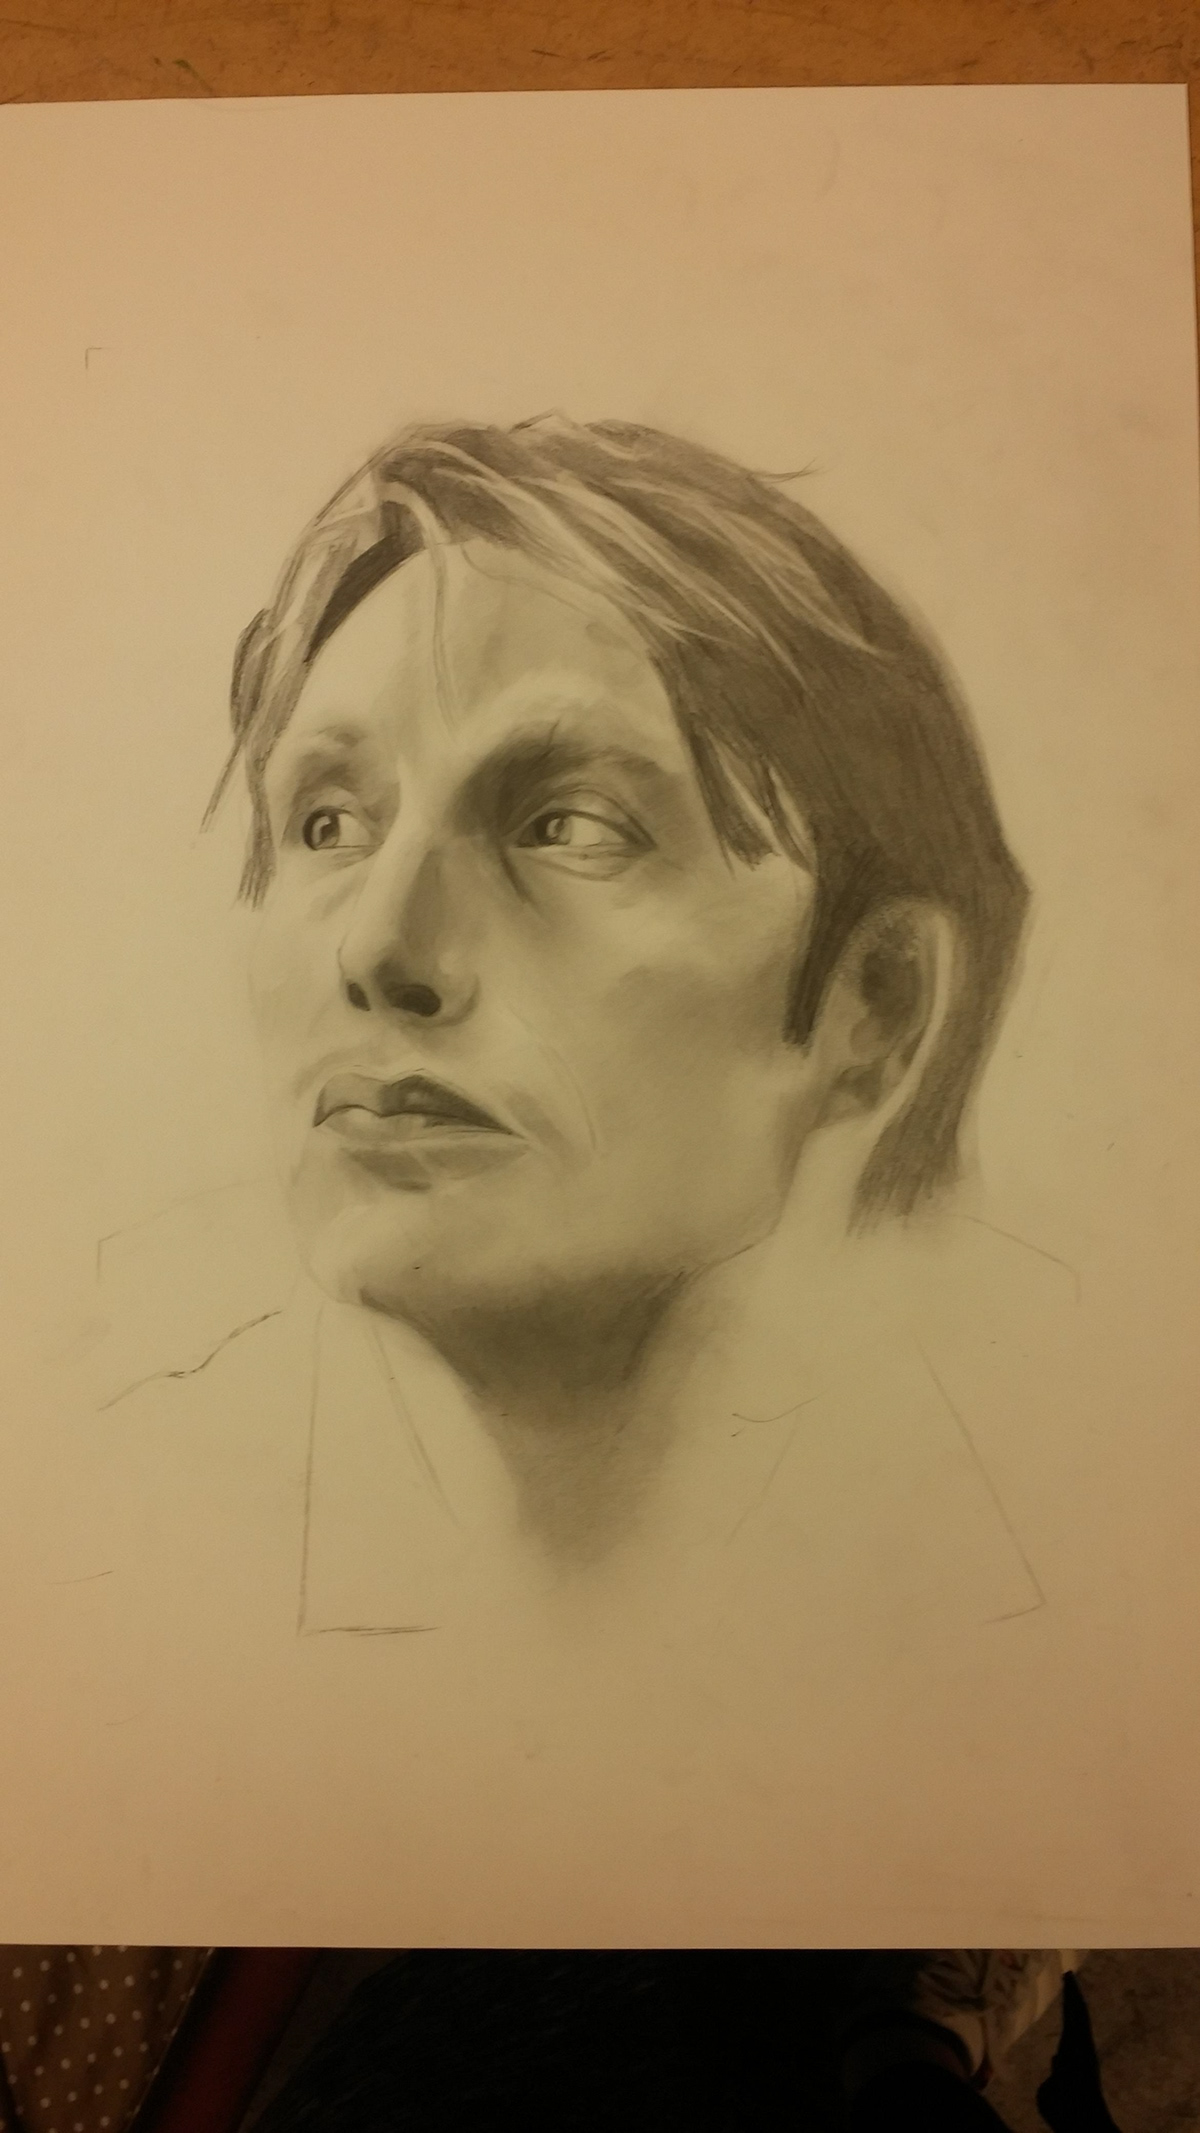 Mads mikkelson